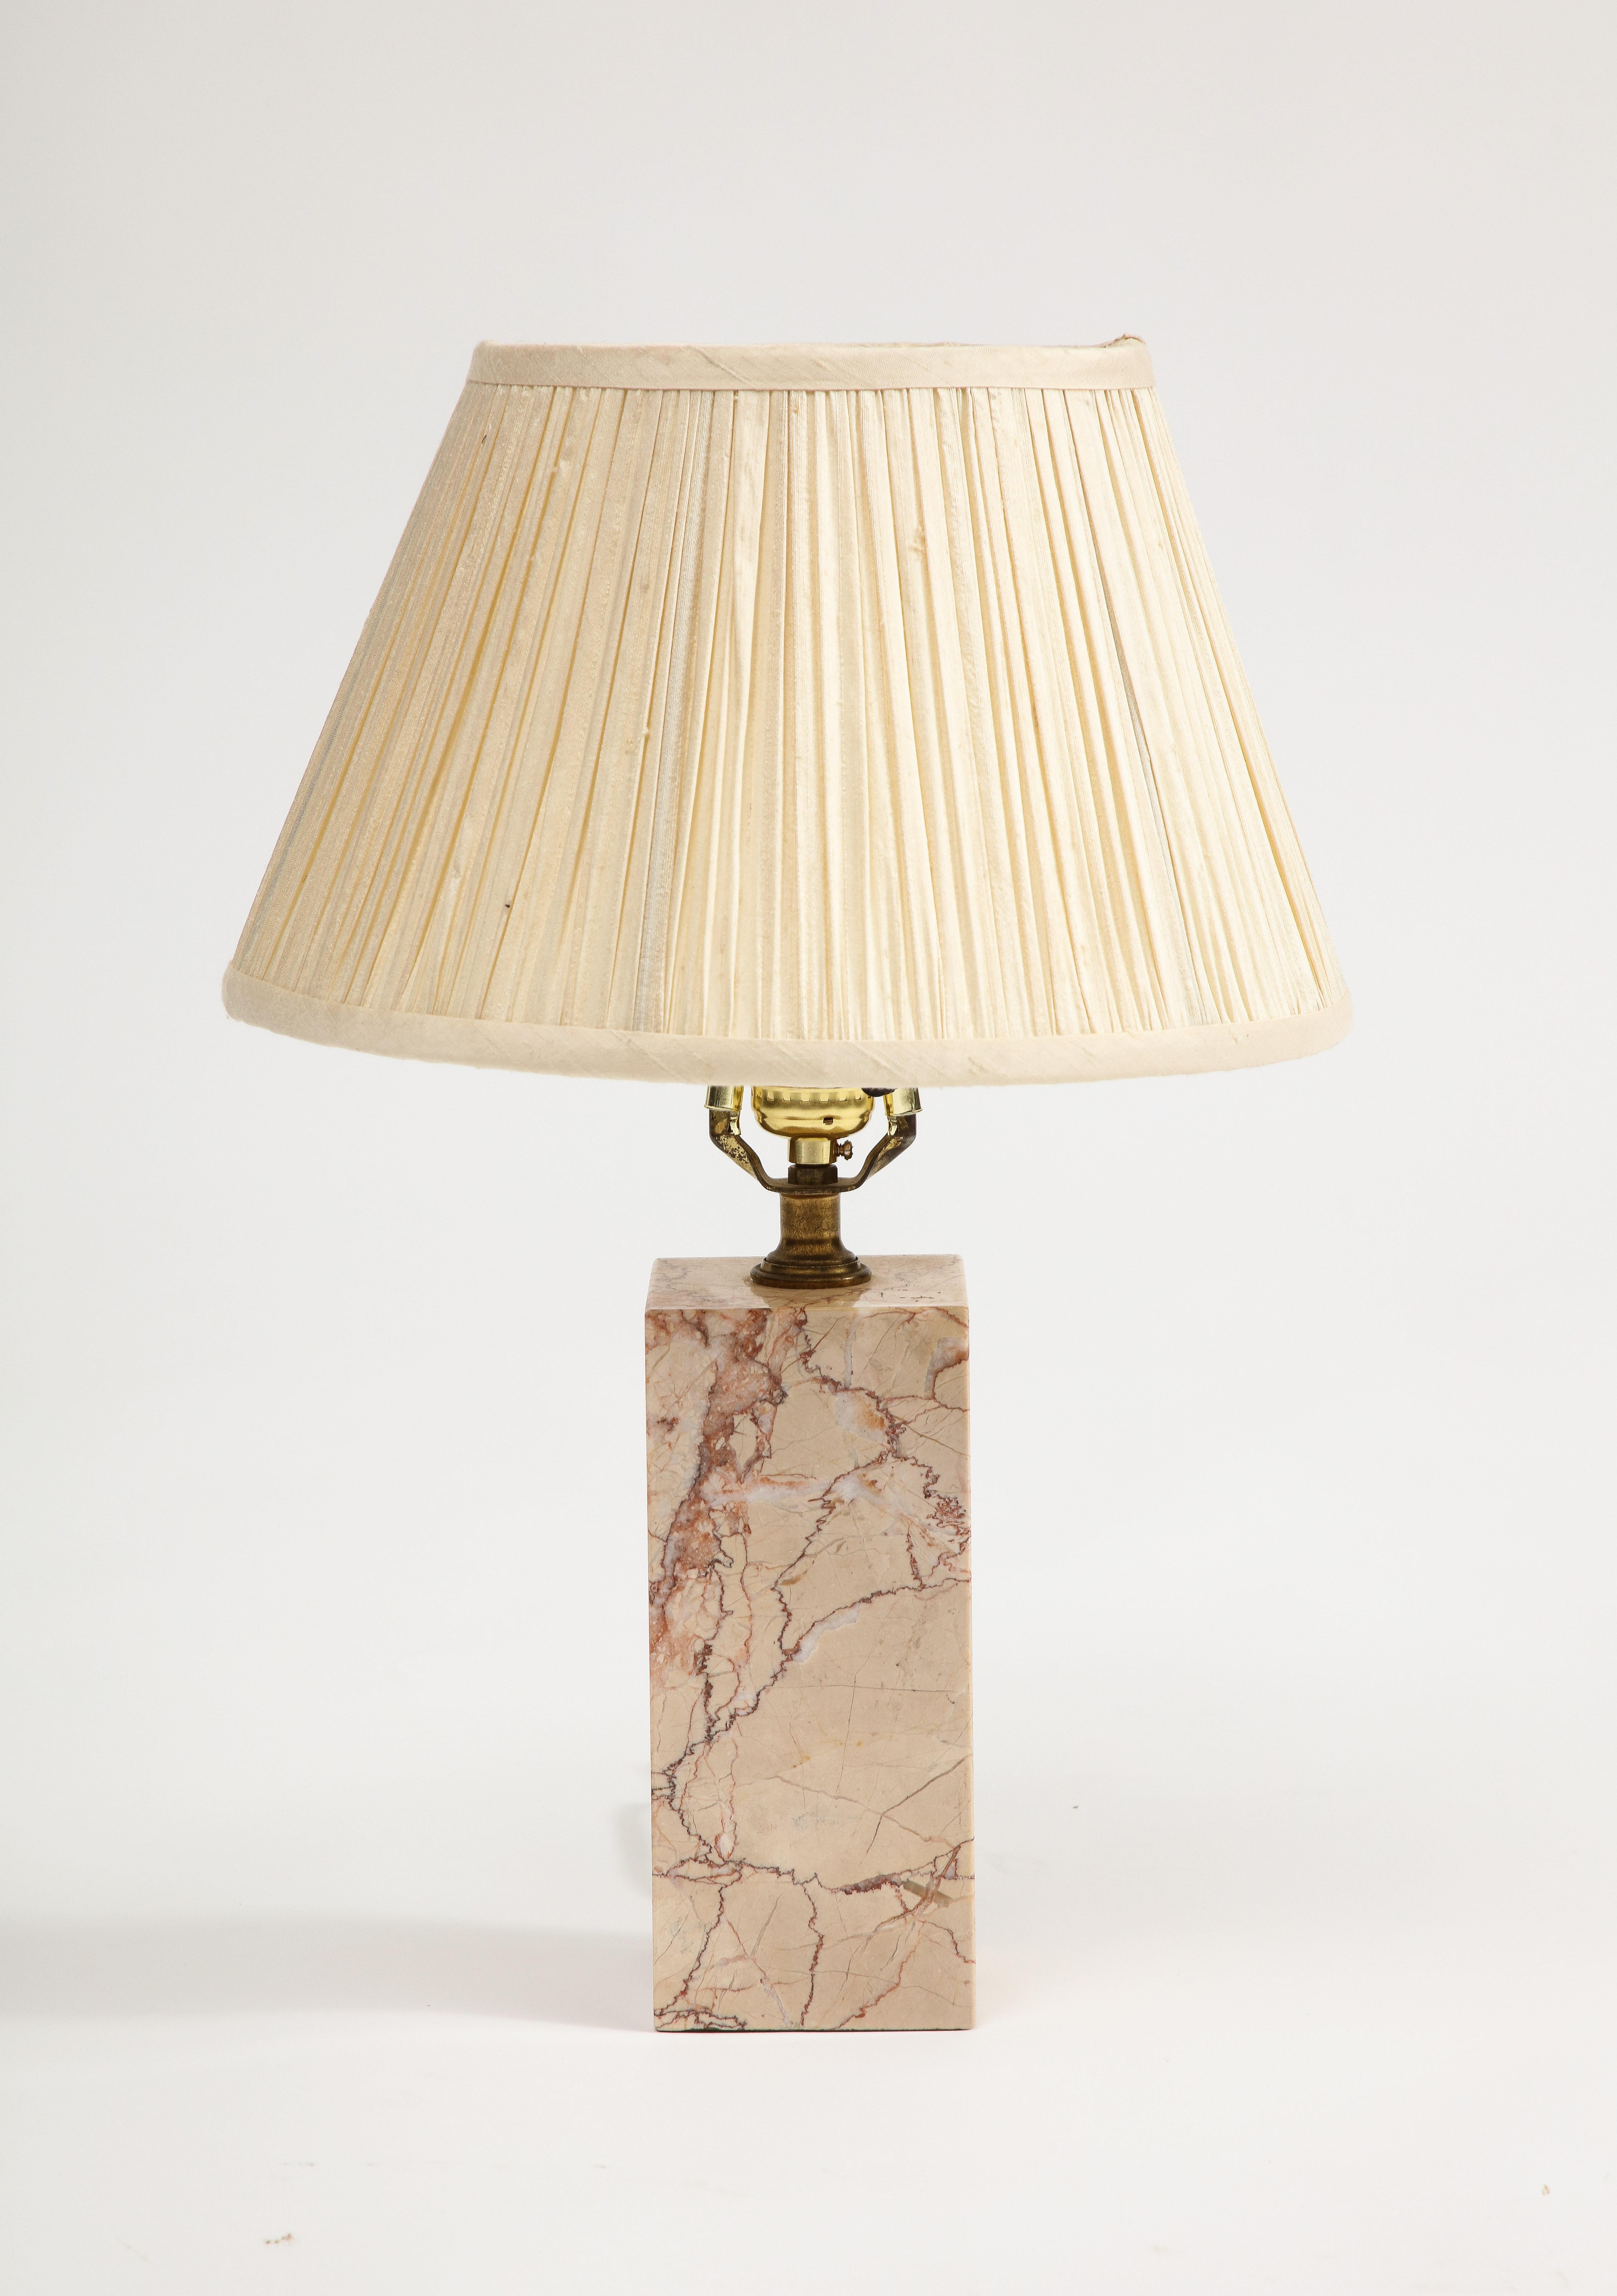 Midcentury Modern pink marble table lamp, attributed to T.H. Robsjohn-Gibbings. Comes with cream pleated lampshade. 

Additional Dimensions - 
With shade: 12